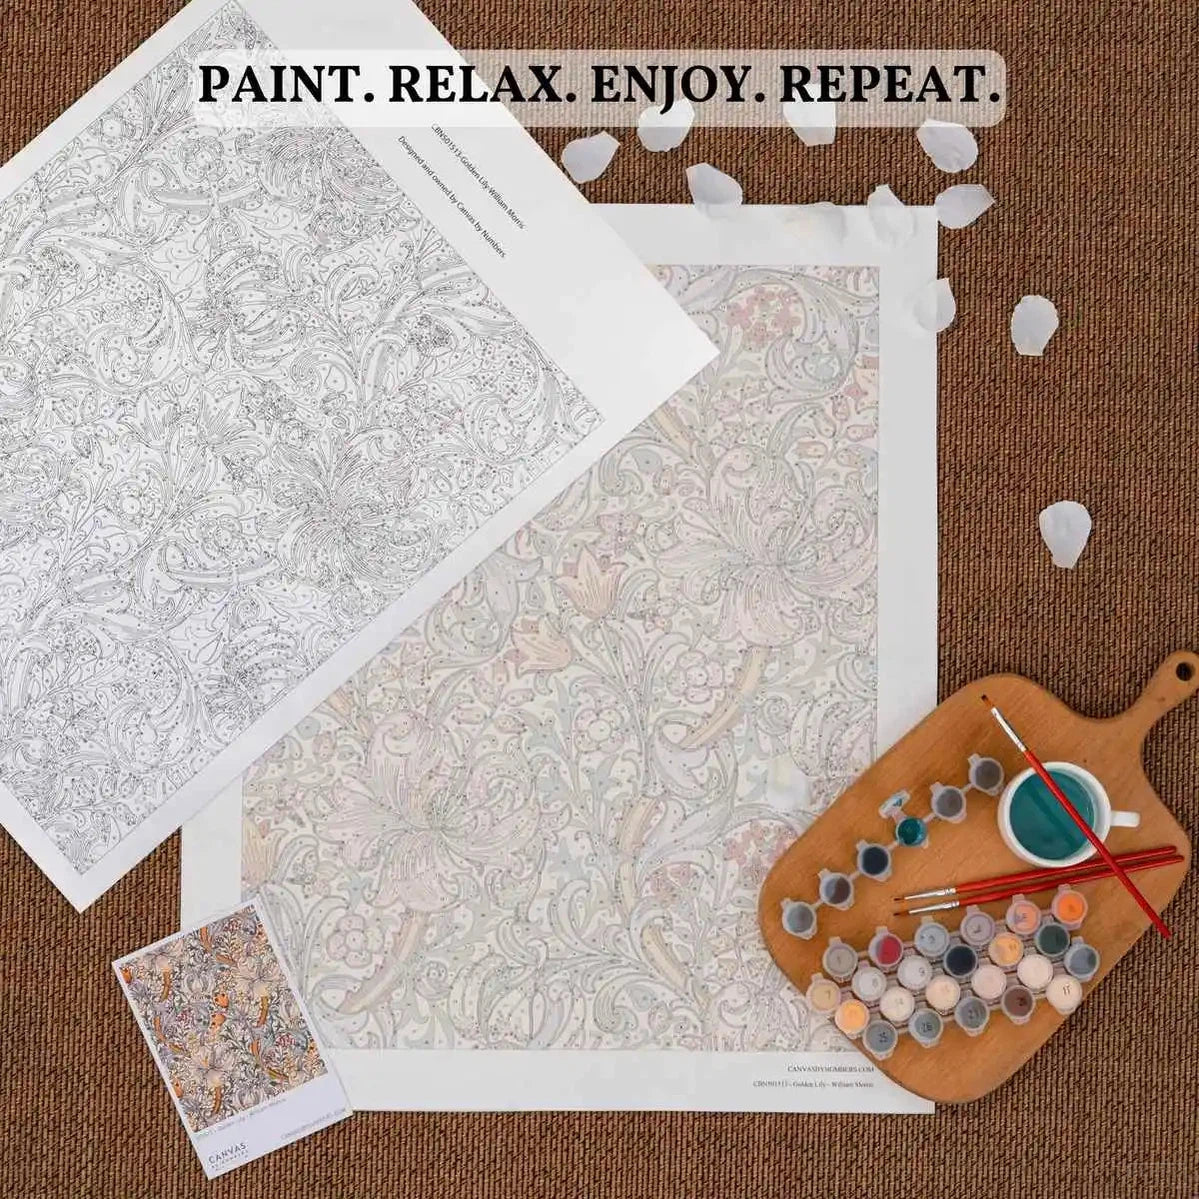 Balloon Flight - Paint by Numbers-Immerse yourself into Natalia's glasswork with this colorful paint by numbers. It's colors will cheer up any room! Shop quality kits at Canvas by Numbers.-Canvas by Numbers